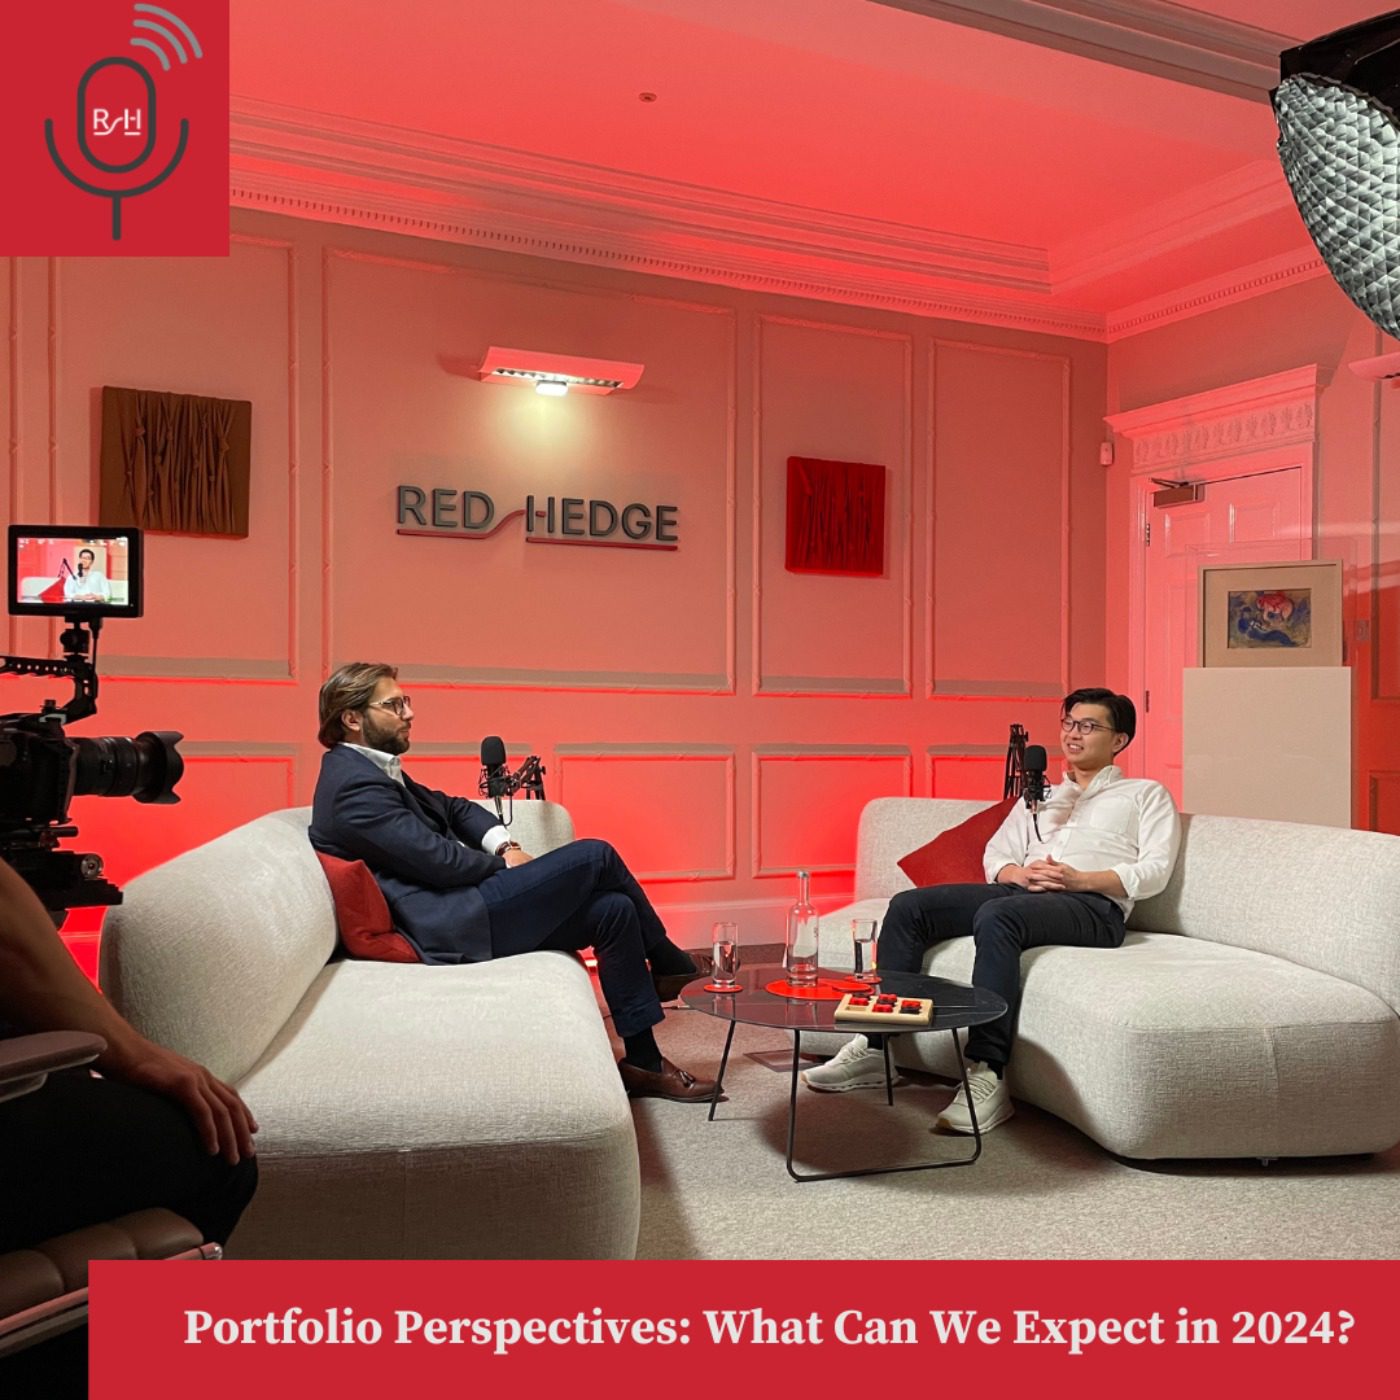 Portfolio Perspectives: What Can We Expect in 2024?